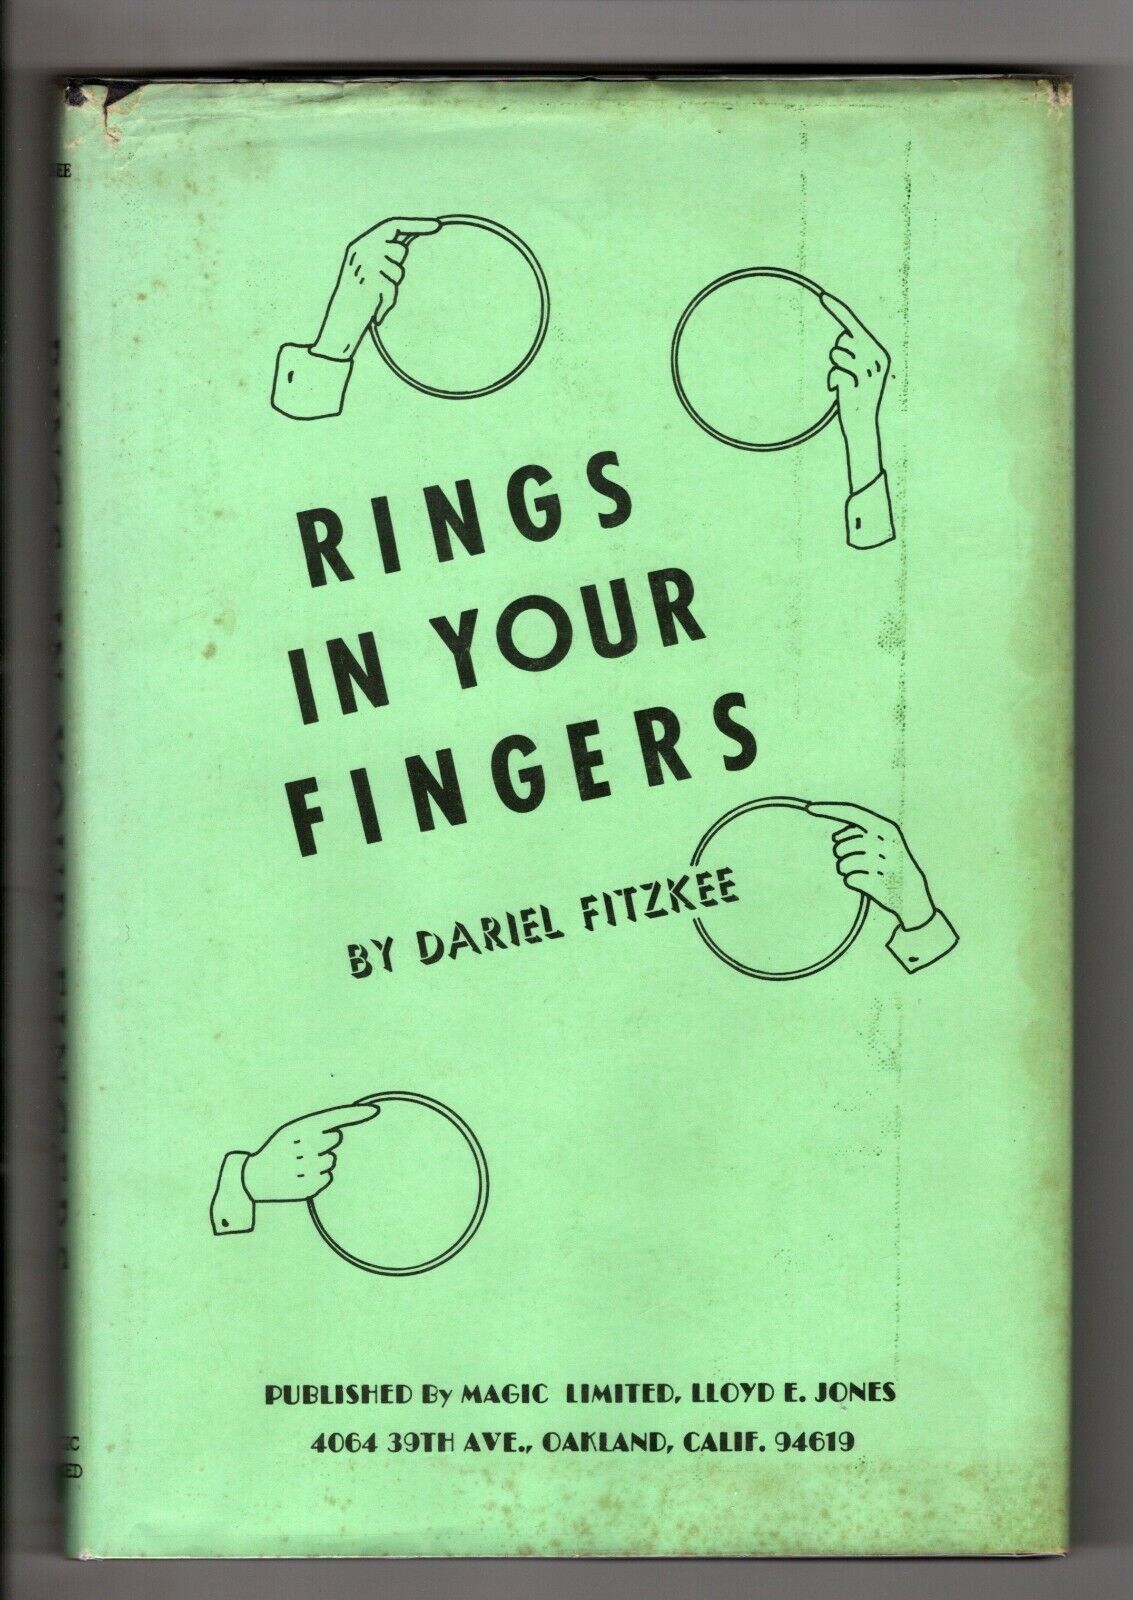 Linking RINGS IN YOUR FINGERS by Dariel Fitzkee 2nd ed 1977 HC/DJ MAGIC LIMITED